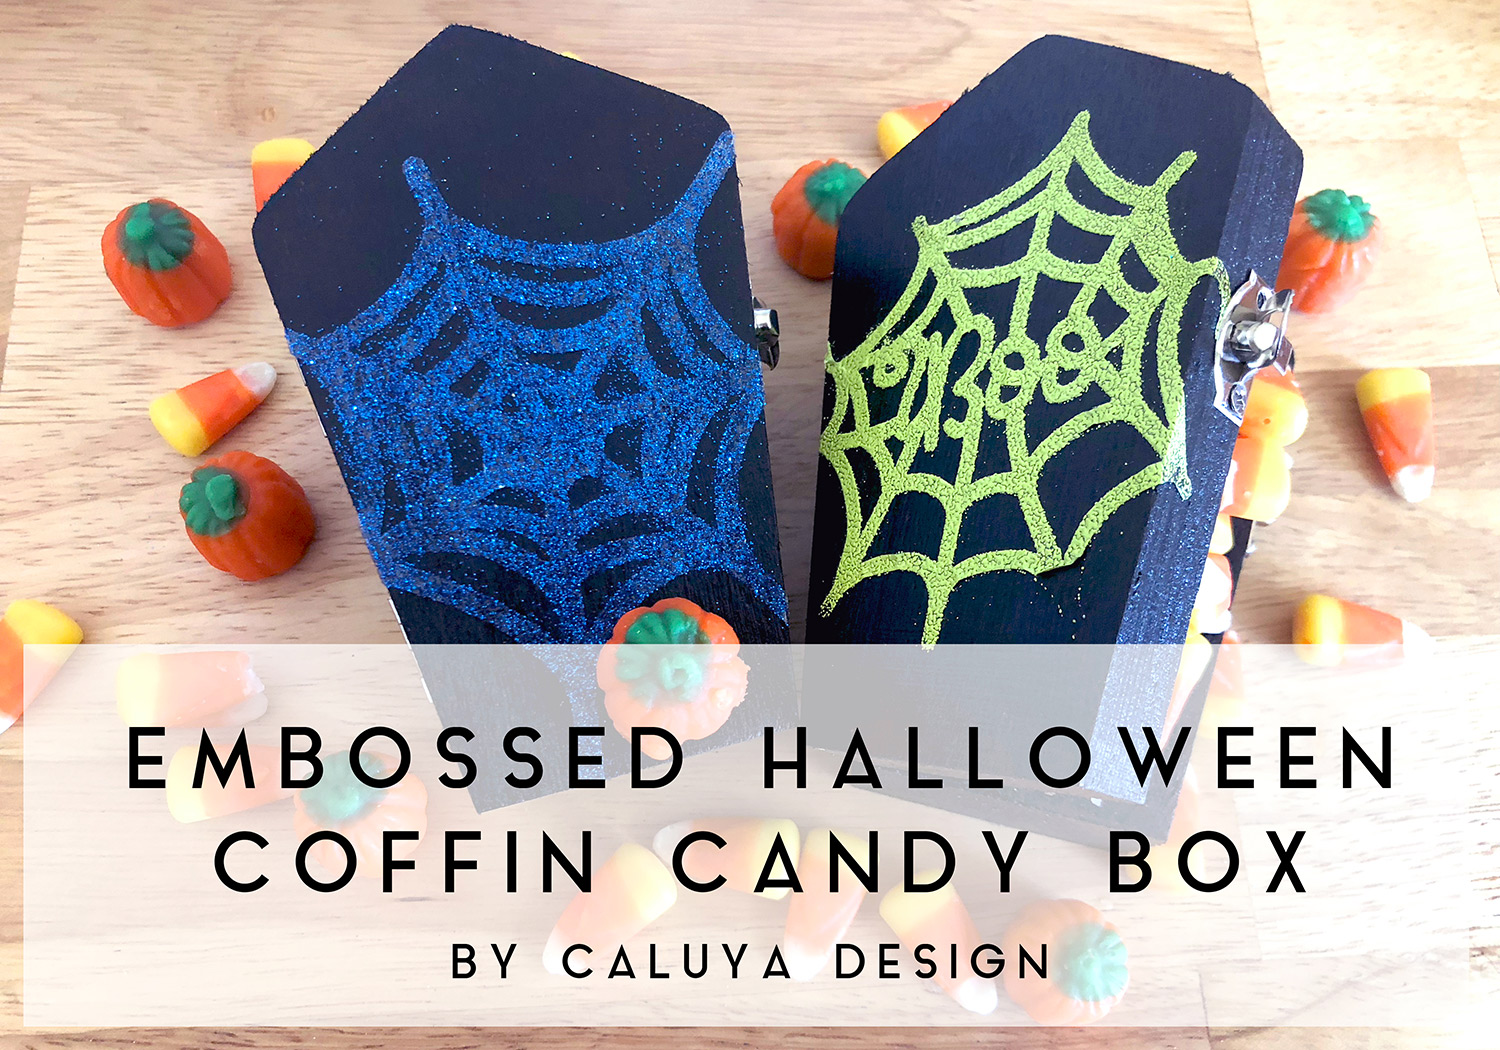 How to Emboss On Wood Surface: Making Halloween Mini-Coffin Candy Box